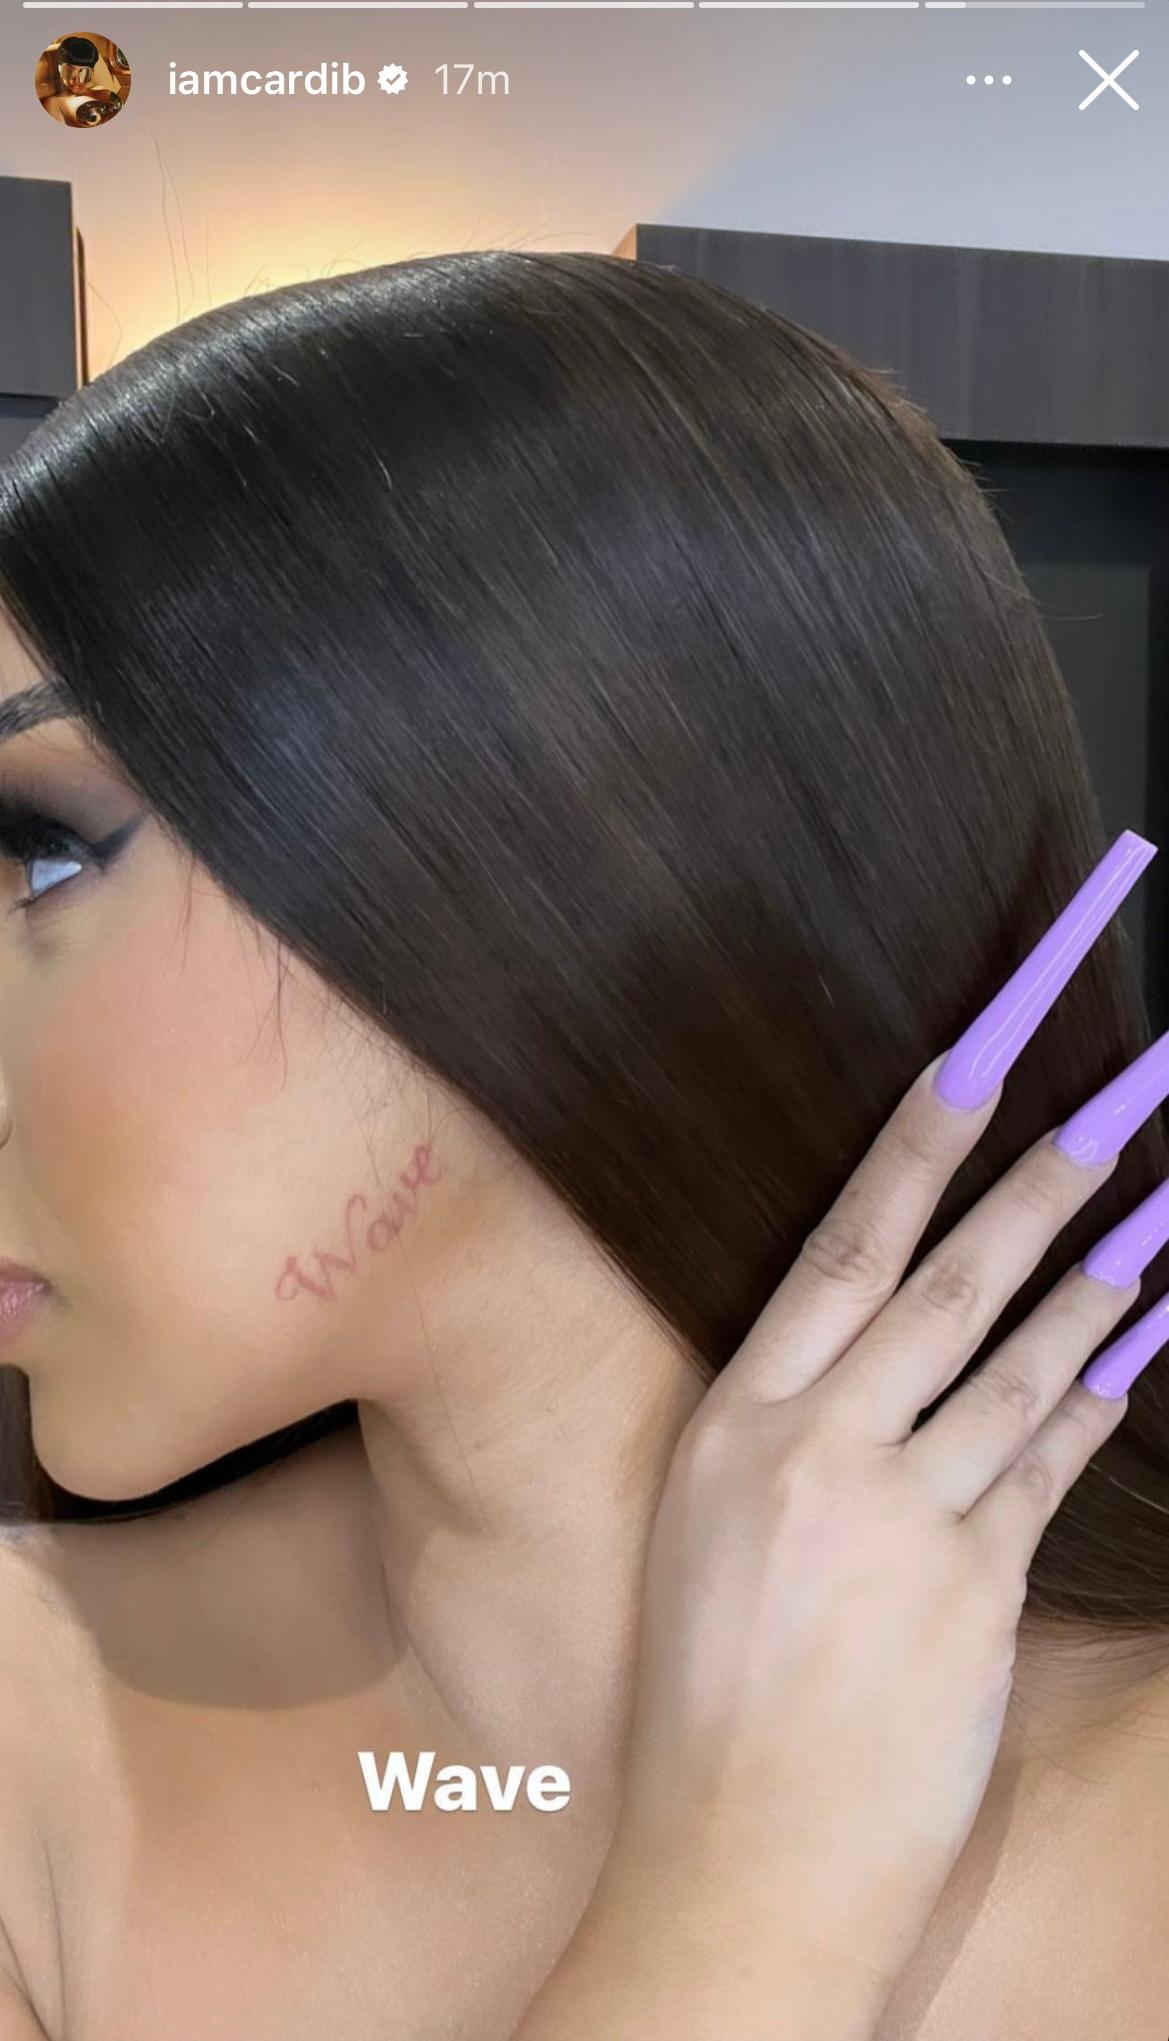 Cardi B gets tattoo of son's name